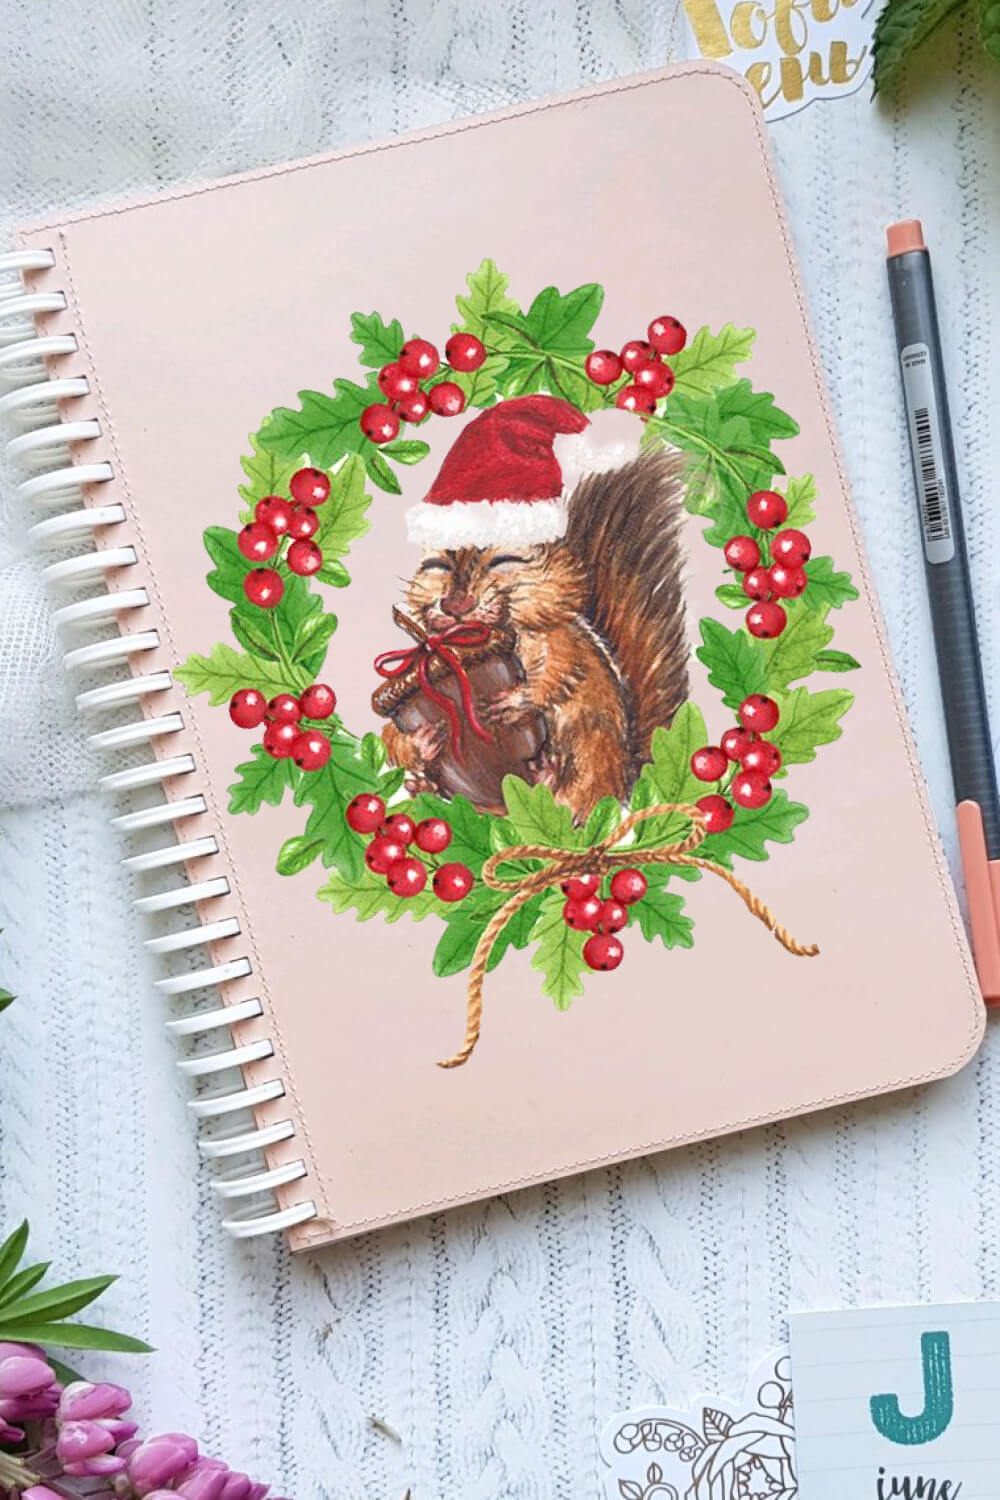 A happy squirrel drawn on a girl's notebook.